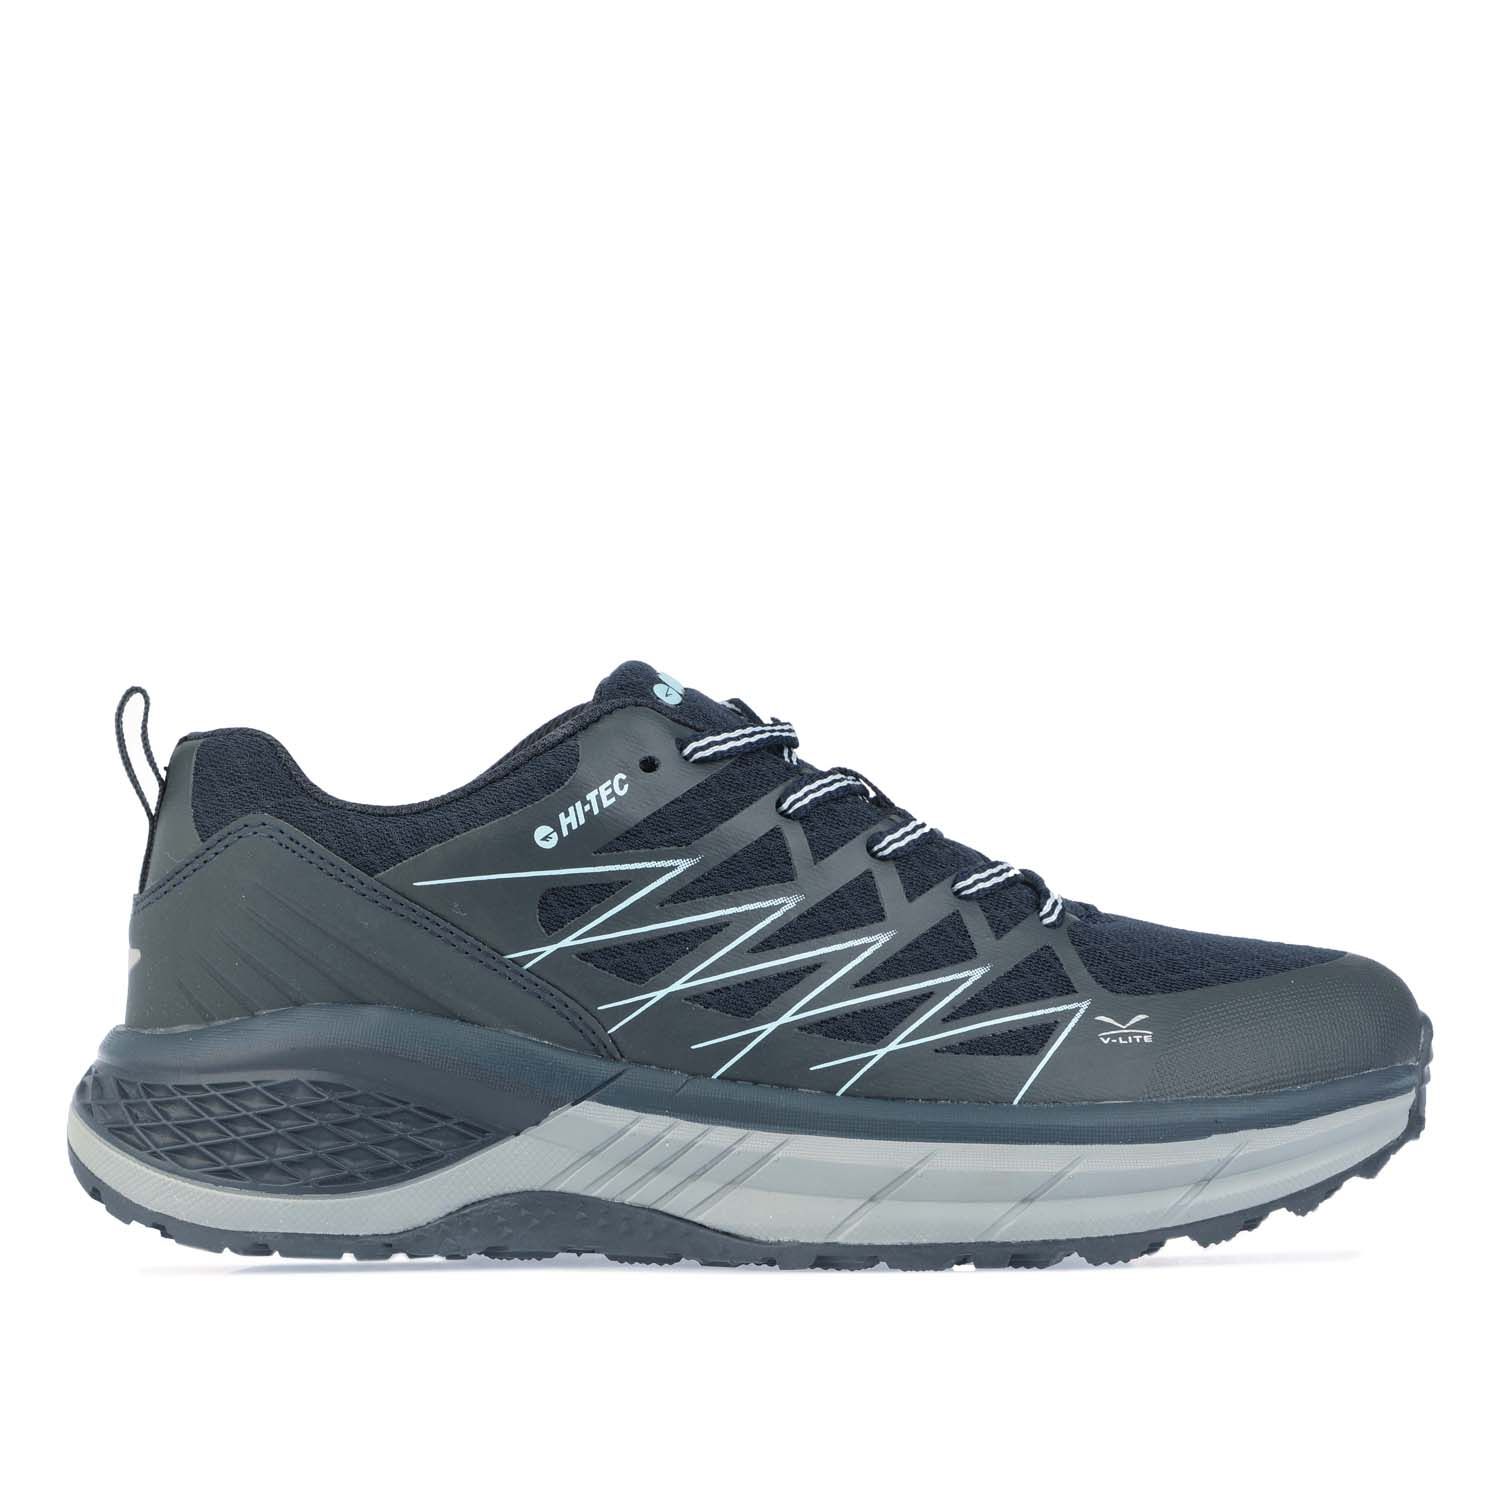 Womens Trail Destroyer Running Shoes